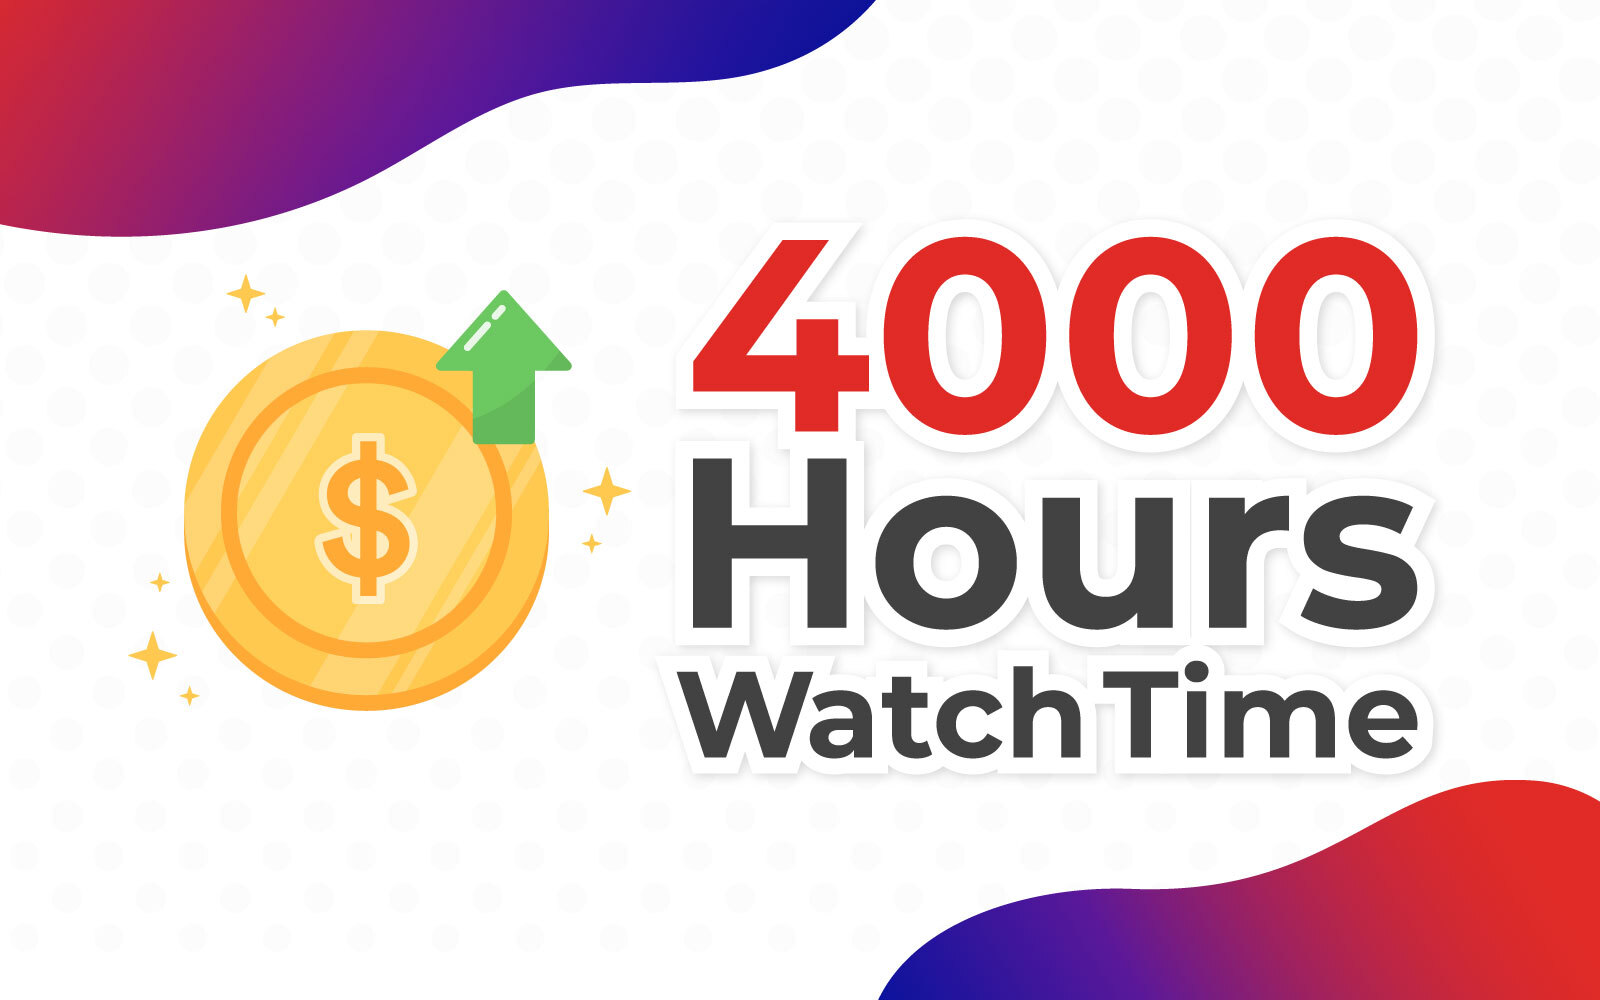 Hovedgade investering Rejse tiltale 6 Ways to Generate 4,000 Hours of YouTube Watch Time FASTER! - TubeBuddy